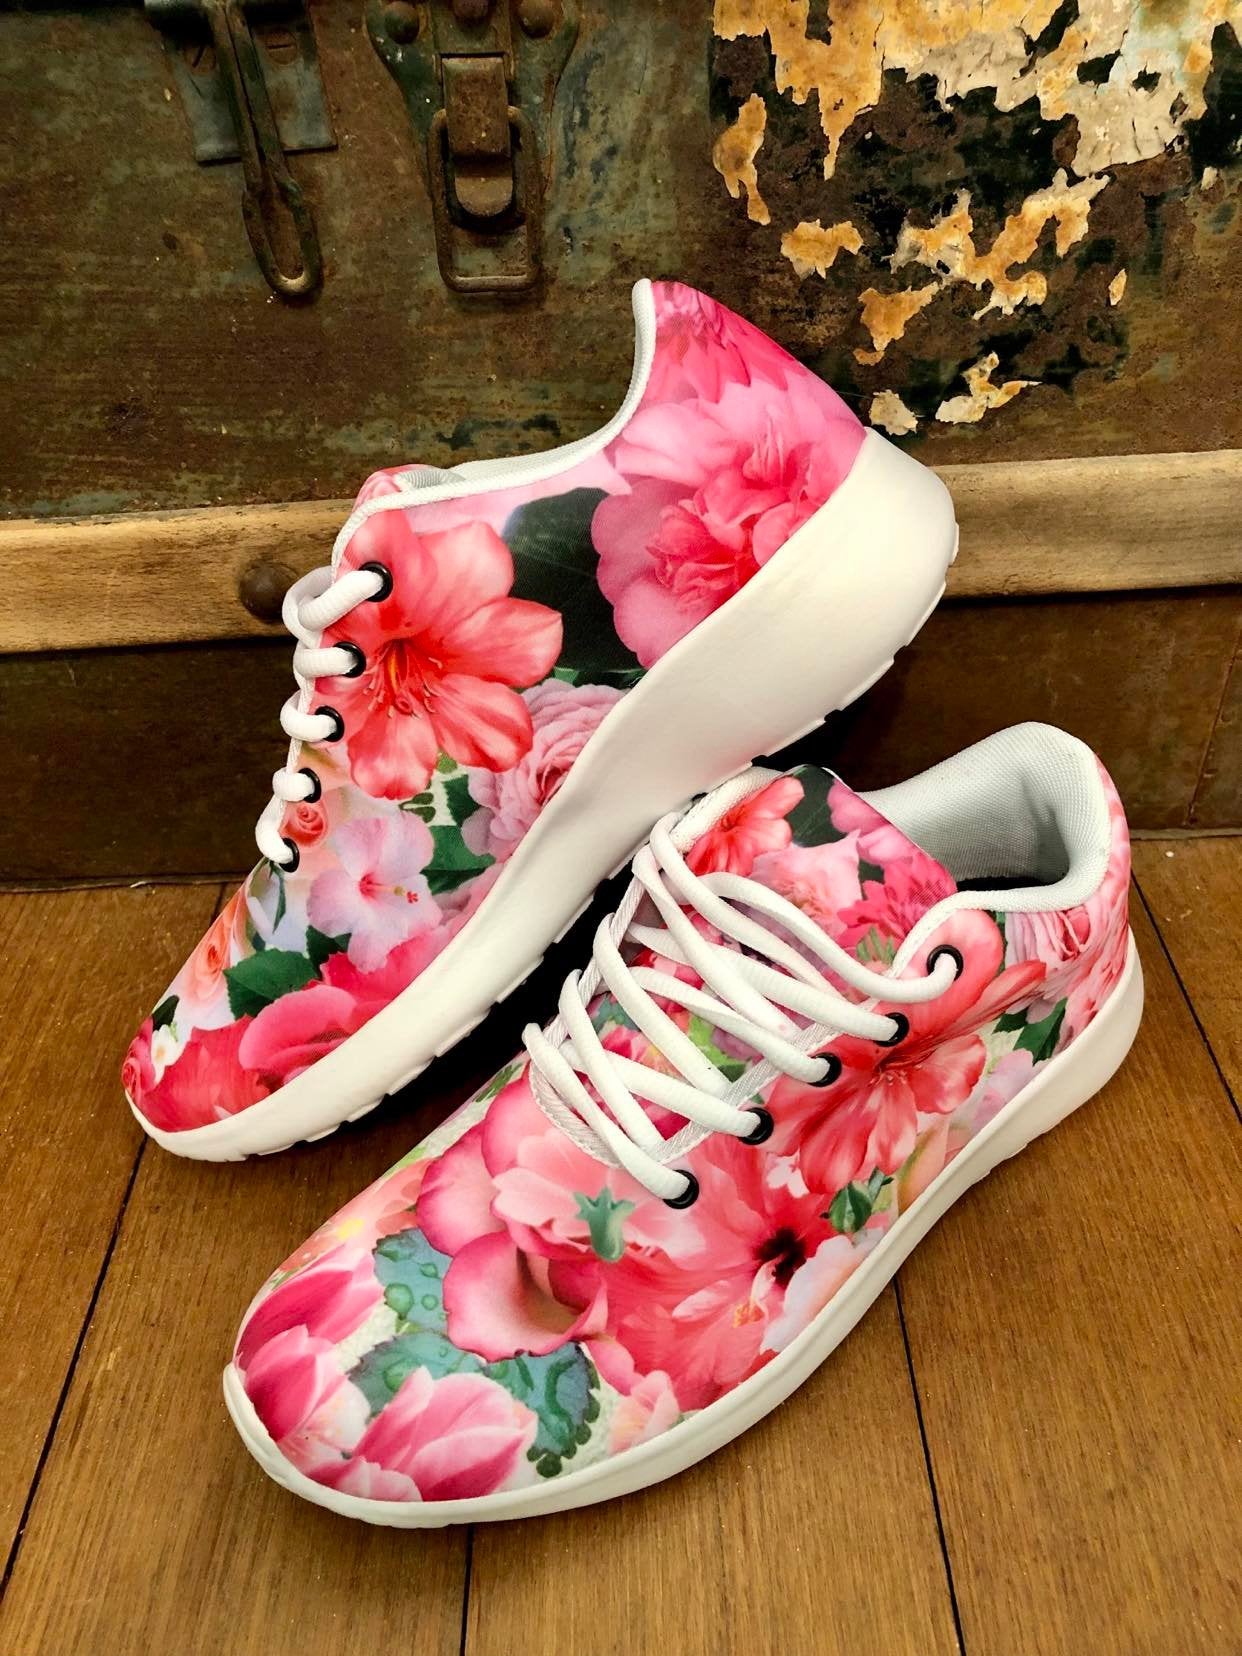 Pink Floral - Runners